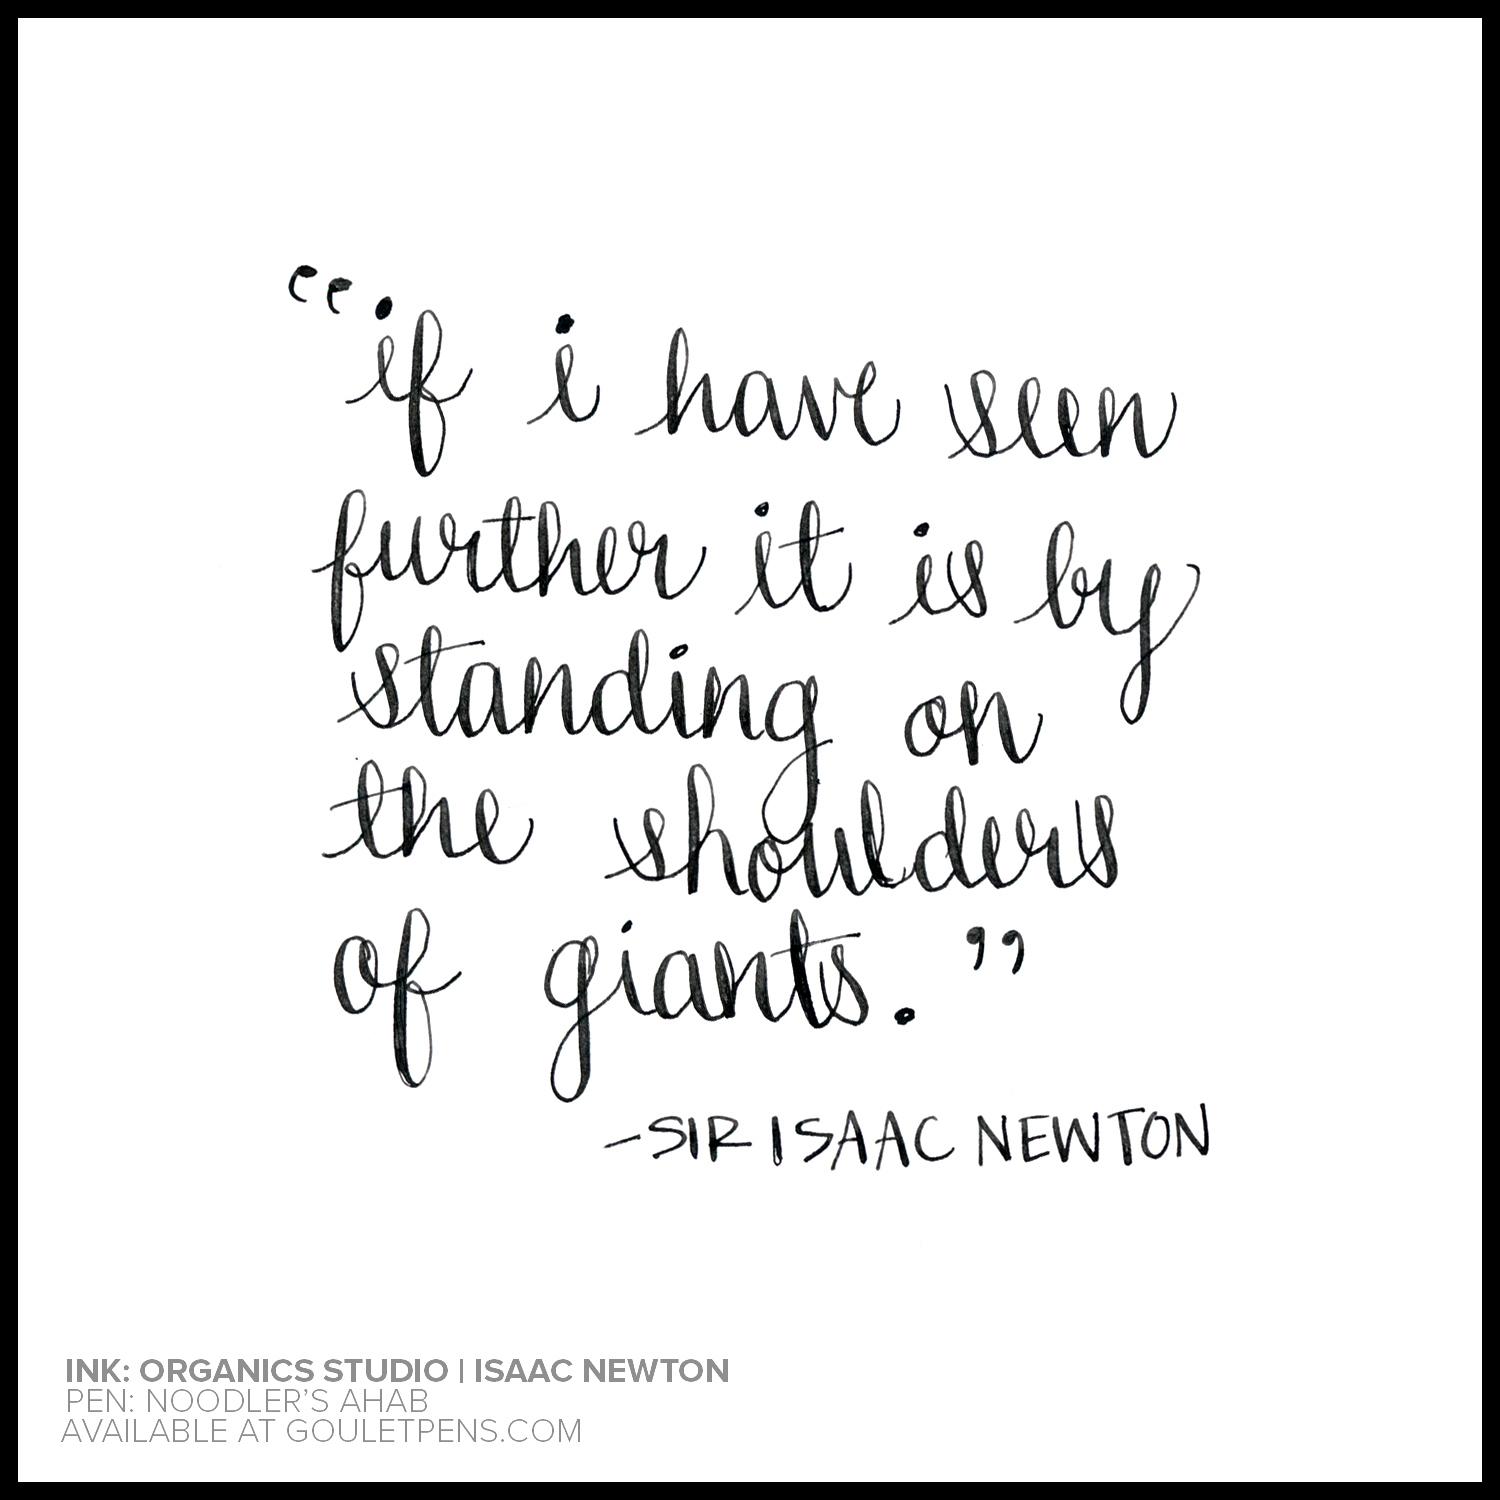 Love Quotes By Newton: Best ideas about isaac newton on